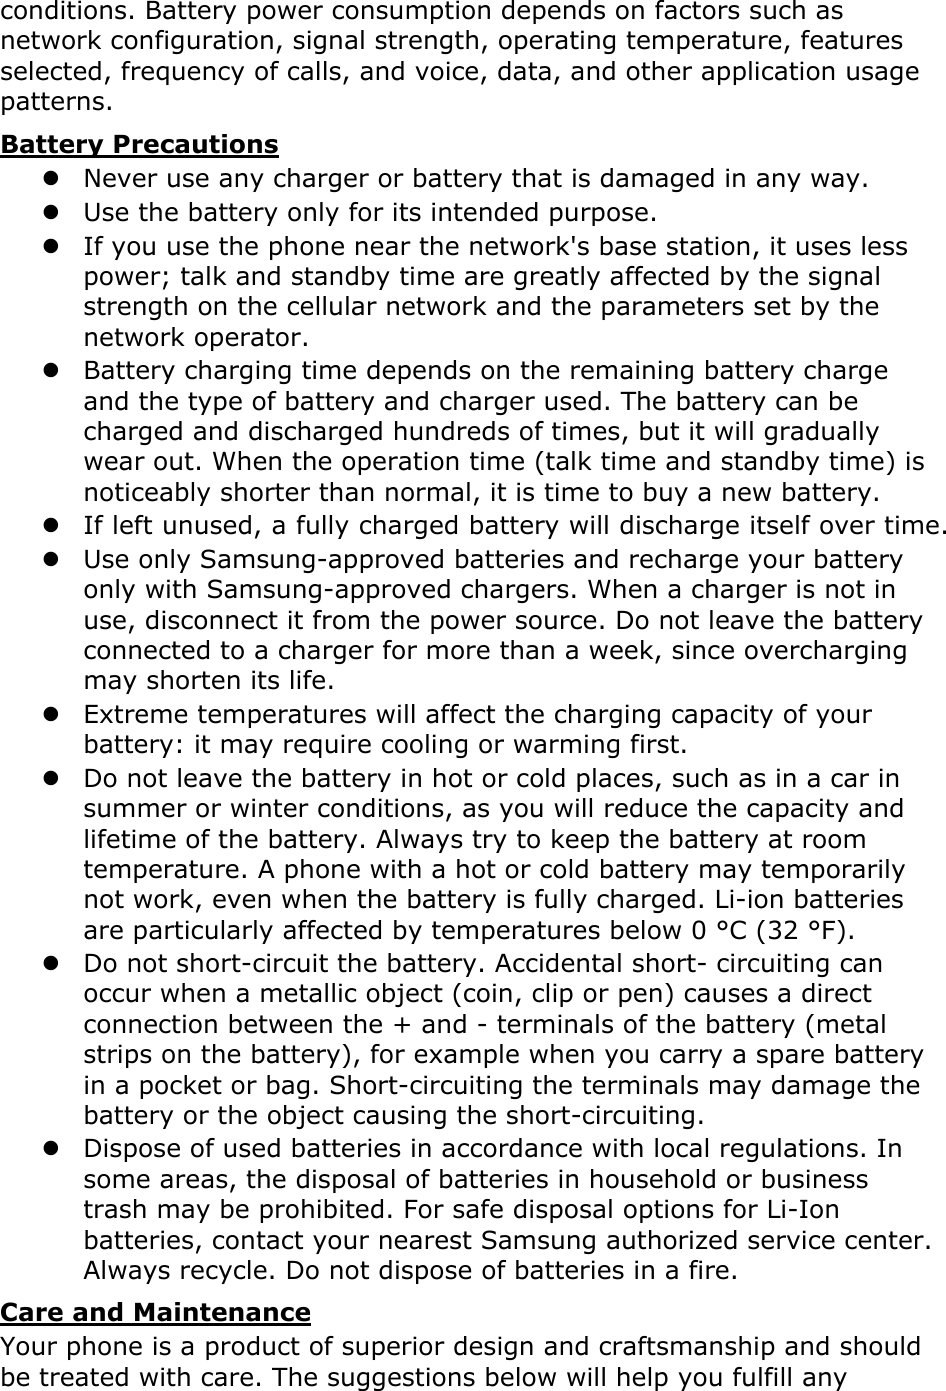 conditions. Battery power consumption depends on factors such as network configuration, signal strength, operating temperature, features selected, frequency of calls, and voice, data, and other application usage patterns.   Battery Precautions z Never use any charger or battery that is damaged in any way. z Use the battery only for its intended purpose. z If you use the phone near the network&apos;s base station, it uses less power; talk and standby time are greatly affected by the signal strength on the cellular network and the parameters set by the network operator. z Battery charging time depends on the remaining battery charge and the type of battery and charger used. The battery can be charged and discharged hundreds of times, but it will gradually wear out. When the operation time (talk time and standby time) is noticeably shorter than normal, it is time to buy a new battery. z If left unused, a fully charged battery will discharge itself over time. z Use only Samsung-approved batteries and recharge your battery only with Samsung-approved chargers. When a charger is not in use, disconnect it from the power source. Do not leave the battery connected to a charger for more than a week, since overcharging may shorten its life. z Extreme temperatures will affect the charging capacity of your battery: it may require cooling or warming first. z Do not leave the battery in hot or cold places, such as in a car in summer or winter conditions, as you will reduce the capacity and lifetime of the battery. Always try to keep the battery at room temperature. A phone with a hot or cold battery may temporarily not work, even when the battery is fully charged. Li-ion batteries are particularly affected by temperatures below 0 °C (32 °F). z Do not short-circuit the battery. Accidental short- circuiting can occur when a metallic object (coin, clip or pen) causes a direct connection between the + and - terminals of the battery (metal strips on the battery), for example when you carry a spare battery in a pocket or bag. Short-circuiting the terminals may damage the battery or the object causing the short-circuiting. z Dispose of used batteries in accordance with local regulations. In some areas, the disposal of batteries in household or business trash may be prohibited. For safe disposal options for Li-Ion batteries, contact your nearest Samsung authorized service center. Always recycle. Do not dispose of batteries in a fire. Care and Maintenance Your phone is a product of superior design and craftsmanship and should be treated with care. The suggestions below will help you fulfill any 